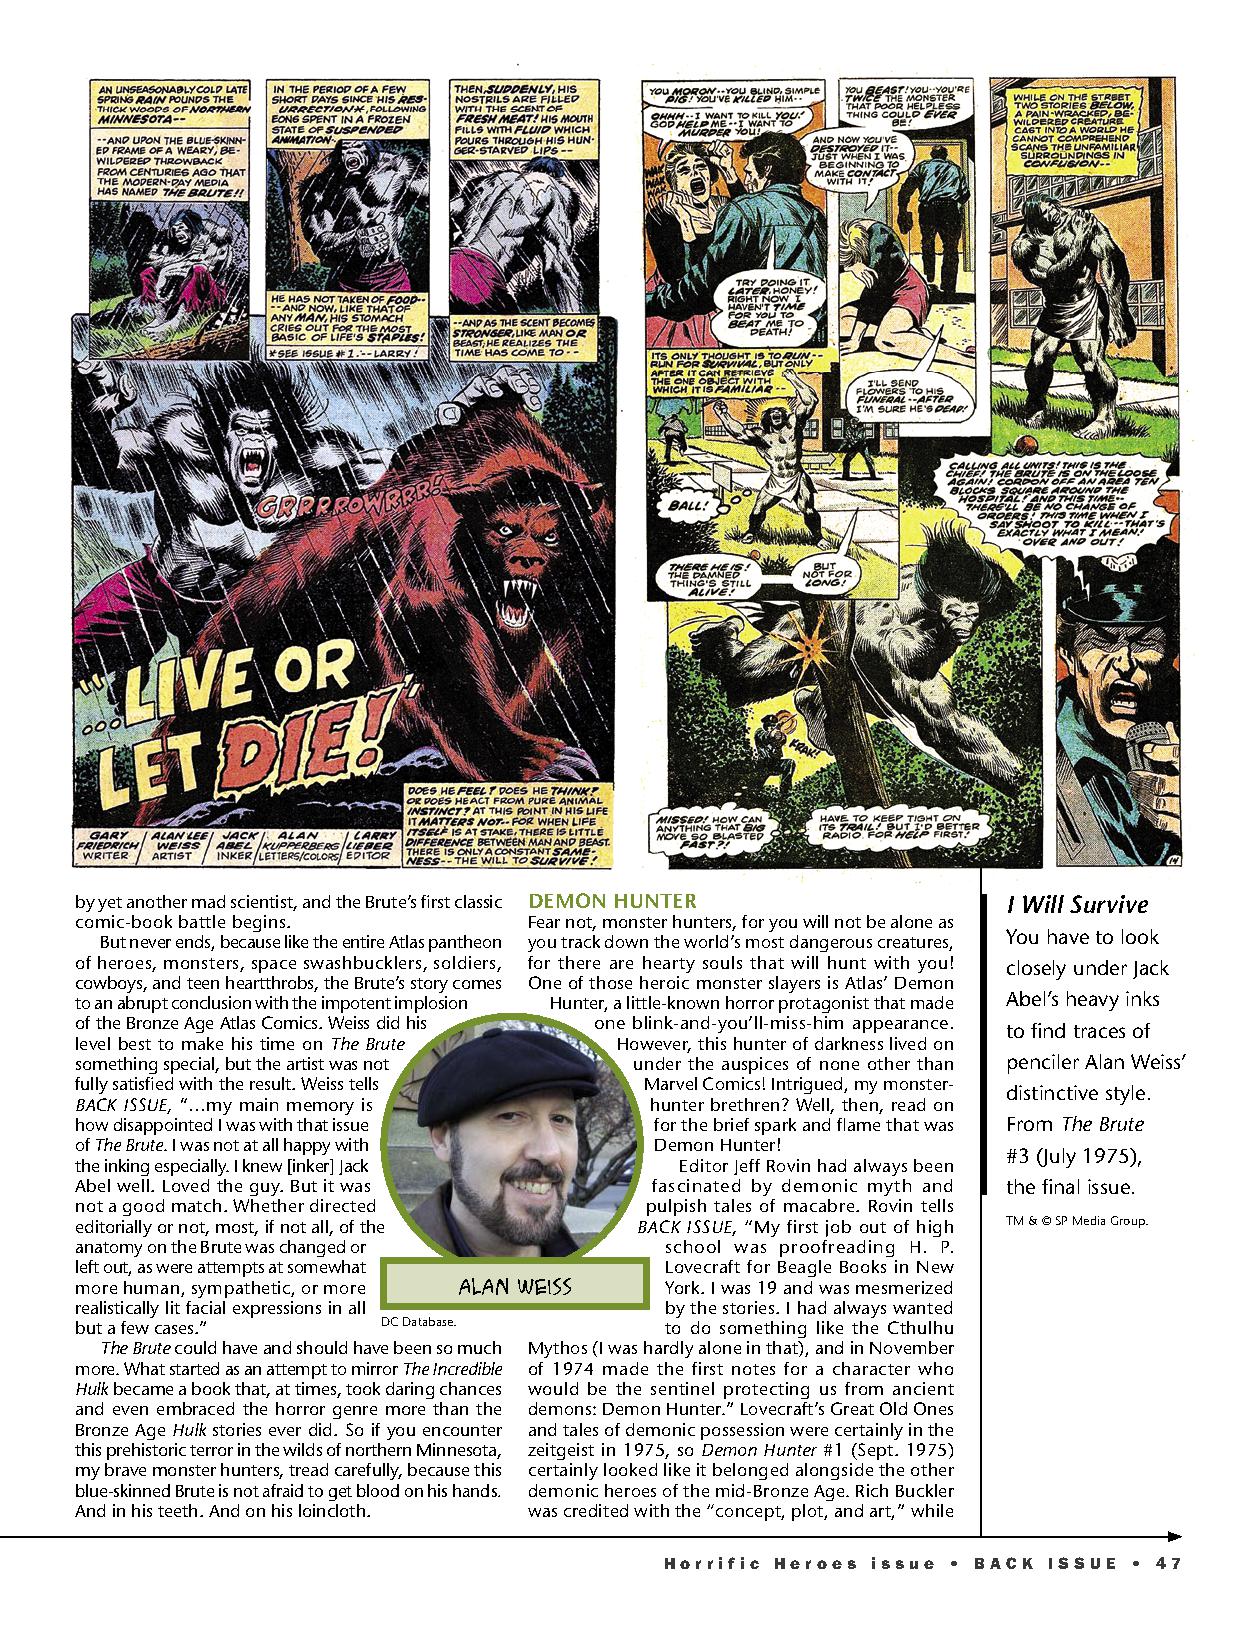 Read online Back Issue comic -  Issue #124 - 49